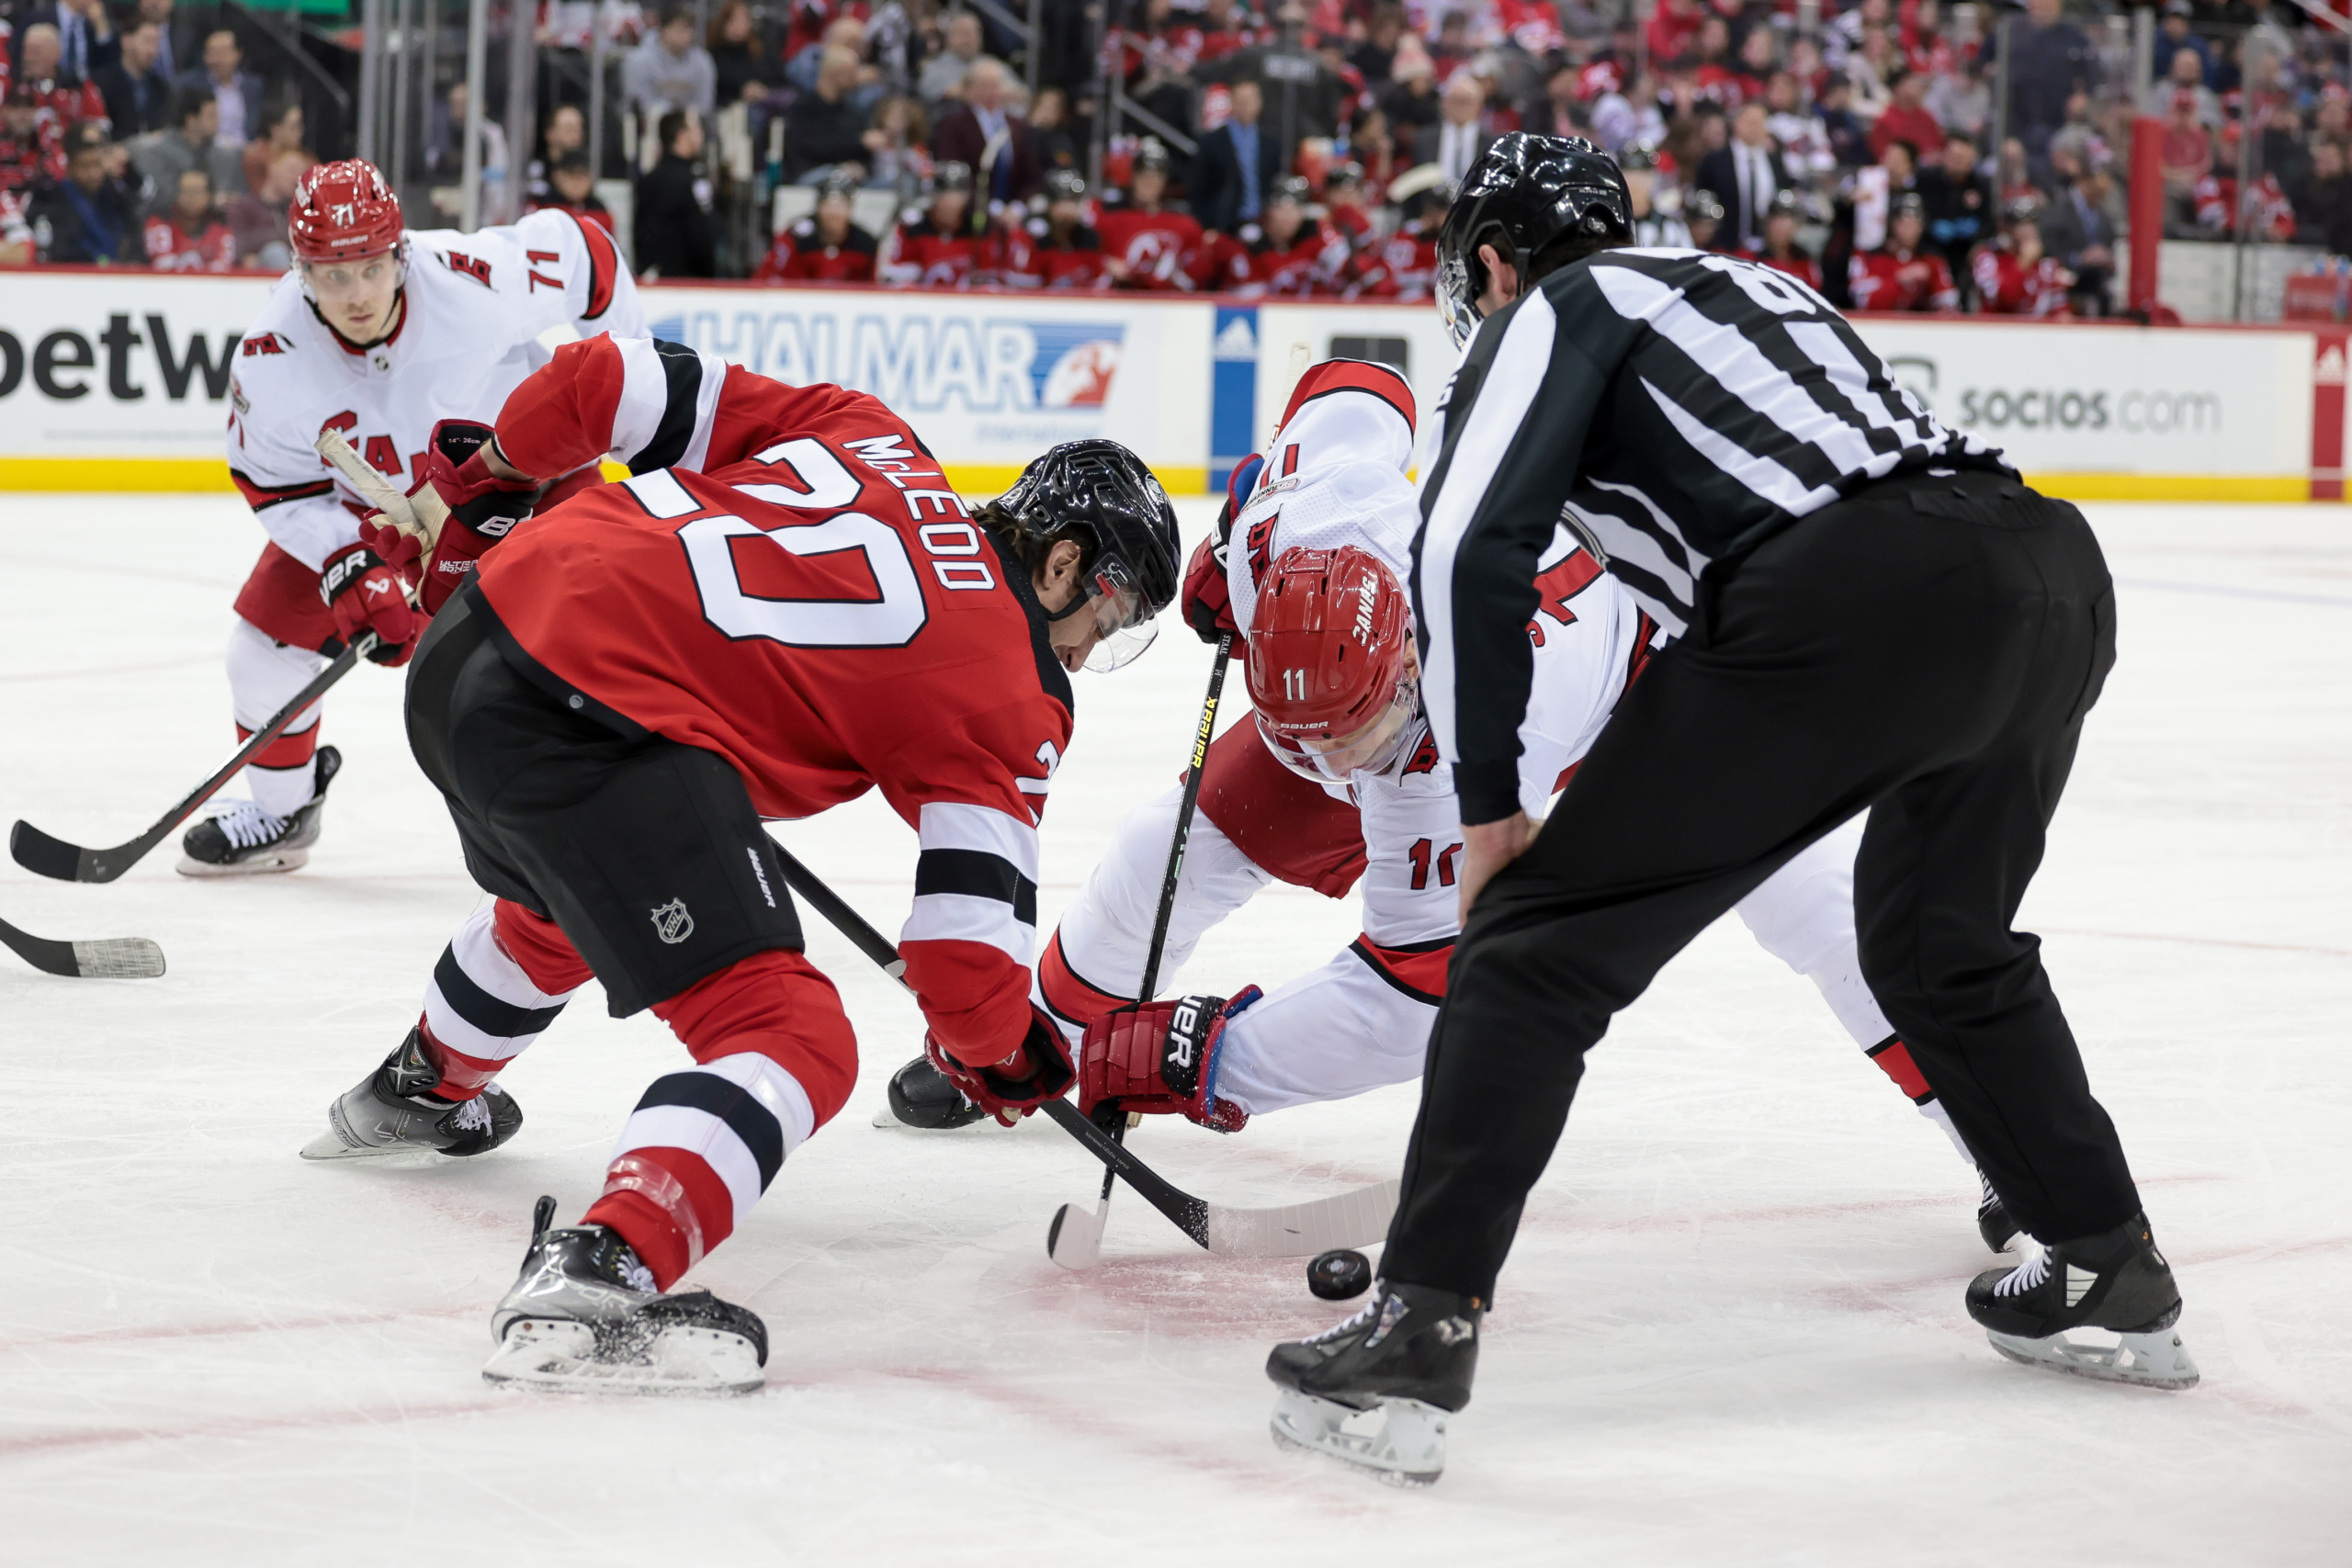 New Jersey Devils vs. Hurricanes: 2023 Playoff Series Preview